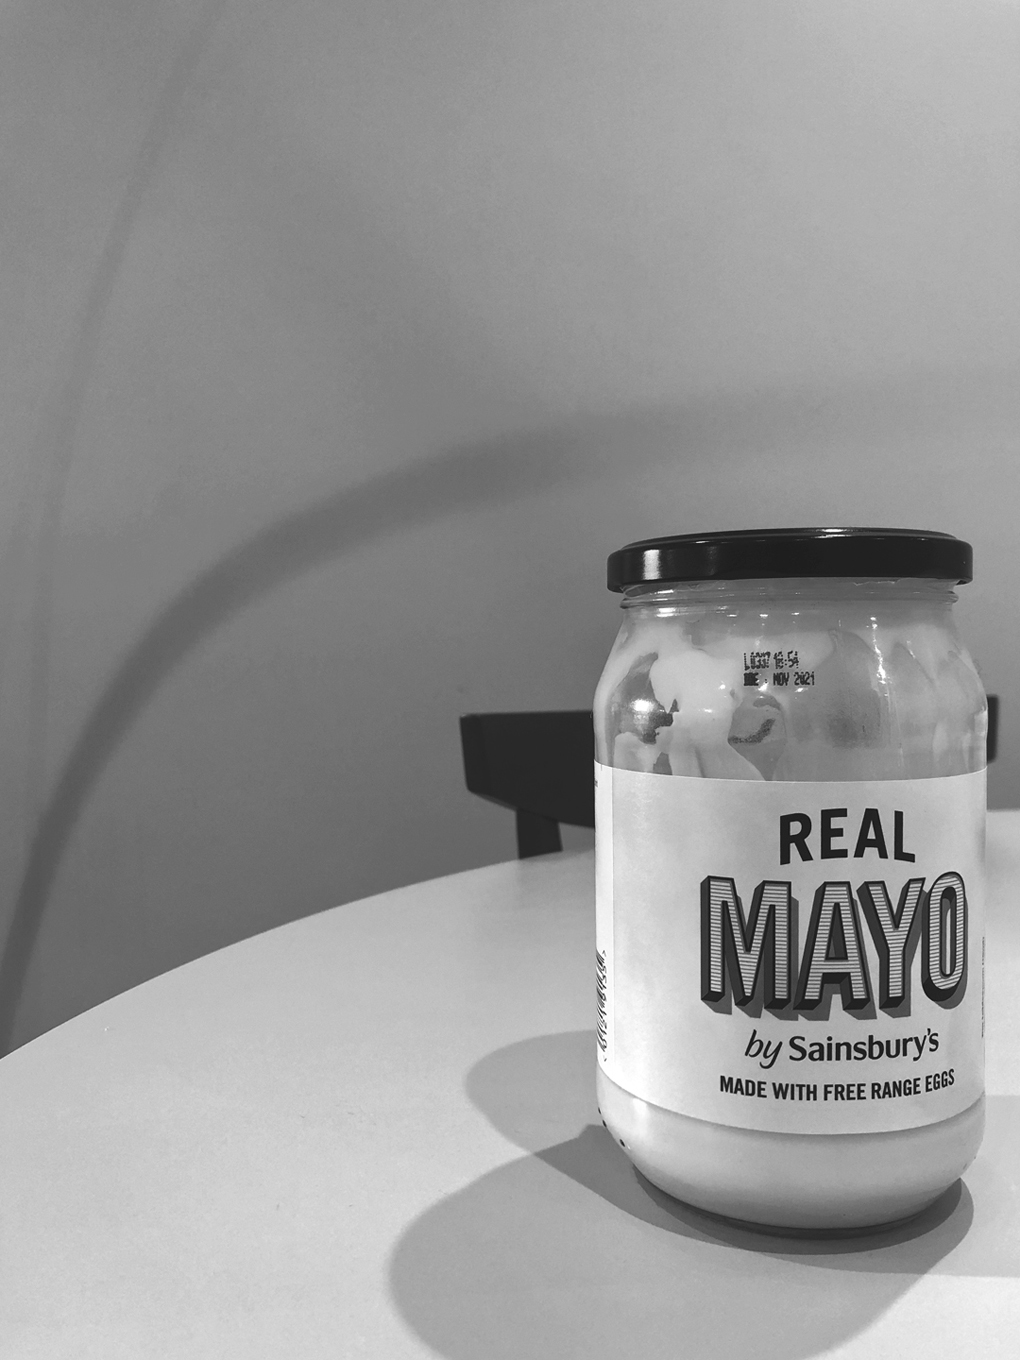 A jar of Sainsbury's mayonnaise in black and white.